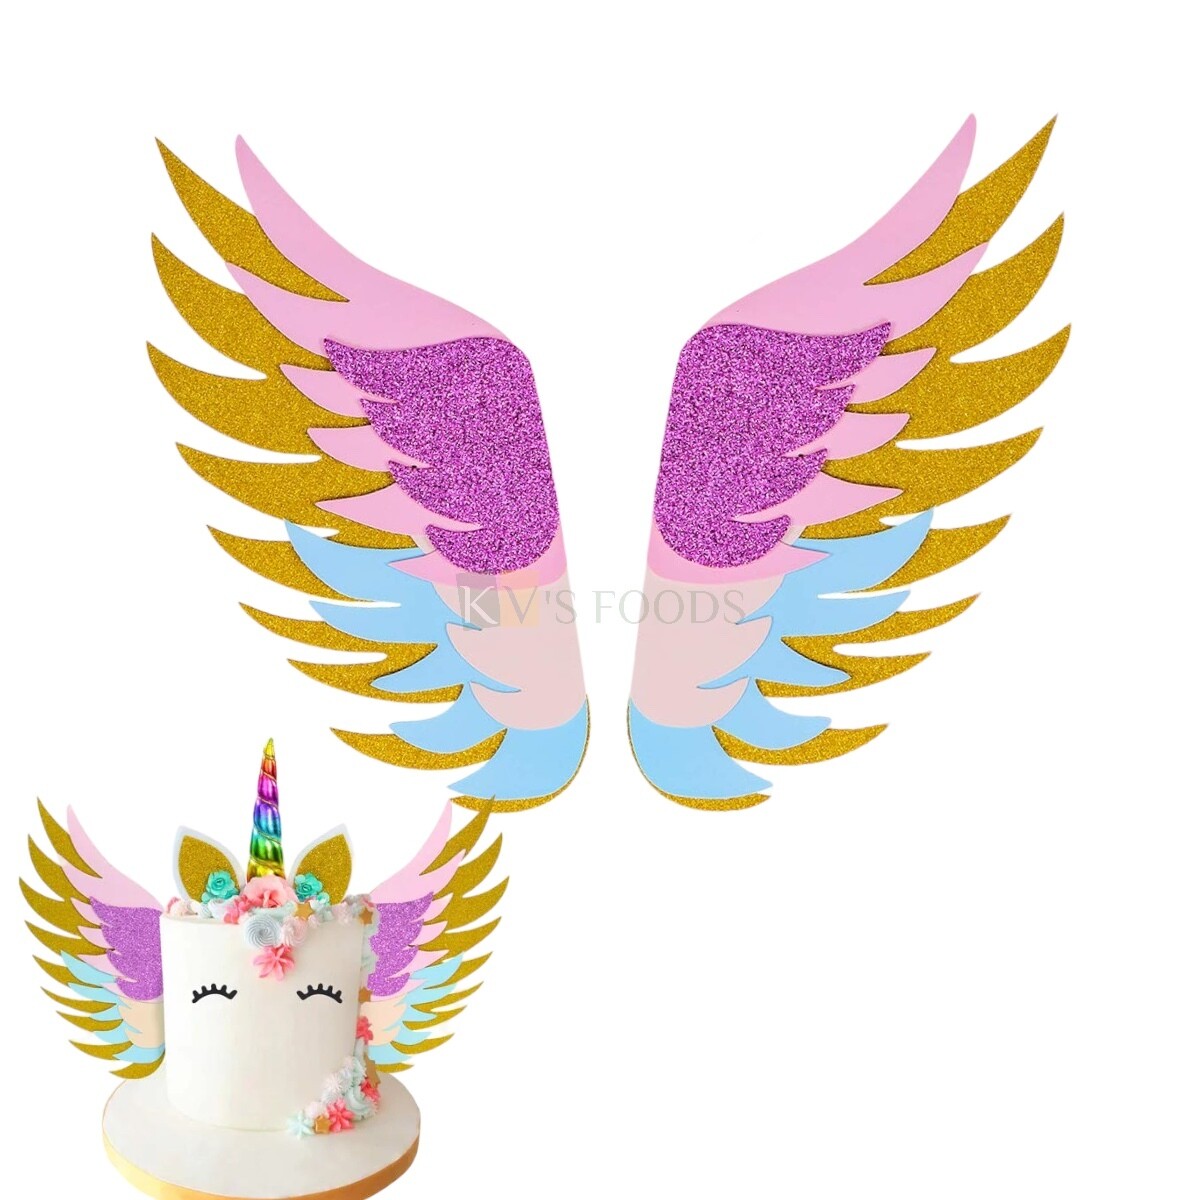 2PC Golden Pink Blue Glitter Unicorn Theme Wings Set Cake Topper Insert, Reusable Cake Topper For Birthday, Girls, Friends Bday, Decorations Items, Cake Accessories, Tags, Cake Toothpick Topper